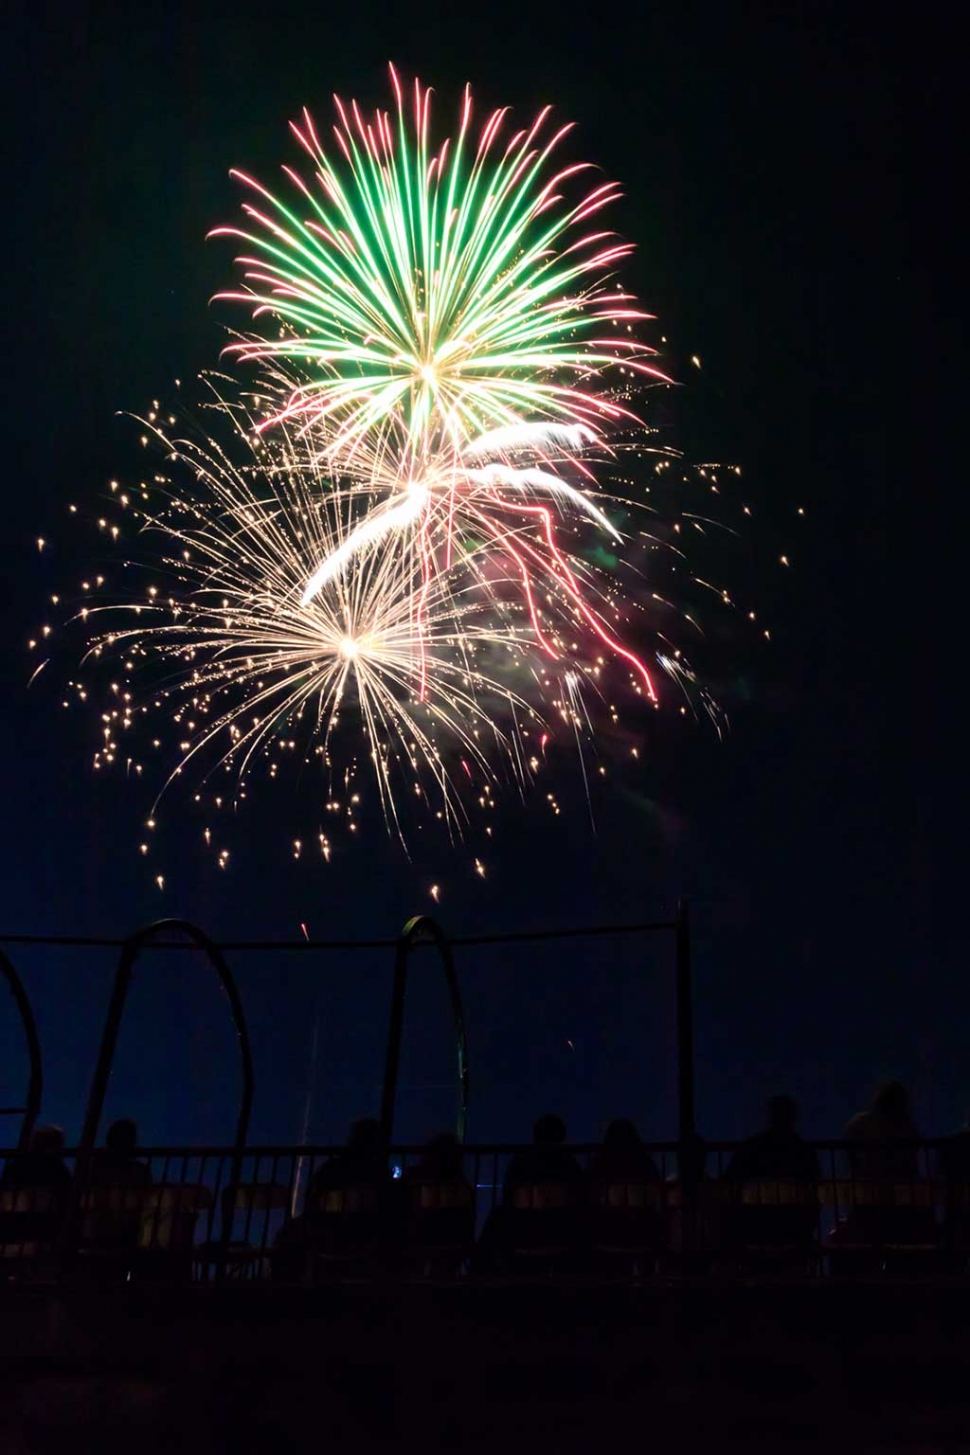 The fireworks display was spectacular this year. 18 illegal fireworks citations were written on the fourth. Photos courtesy Bob Crum.